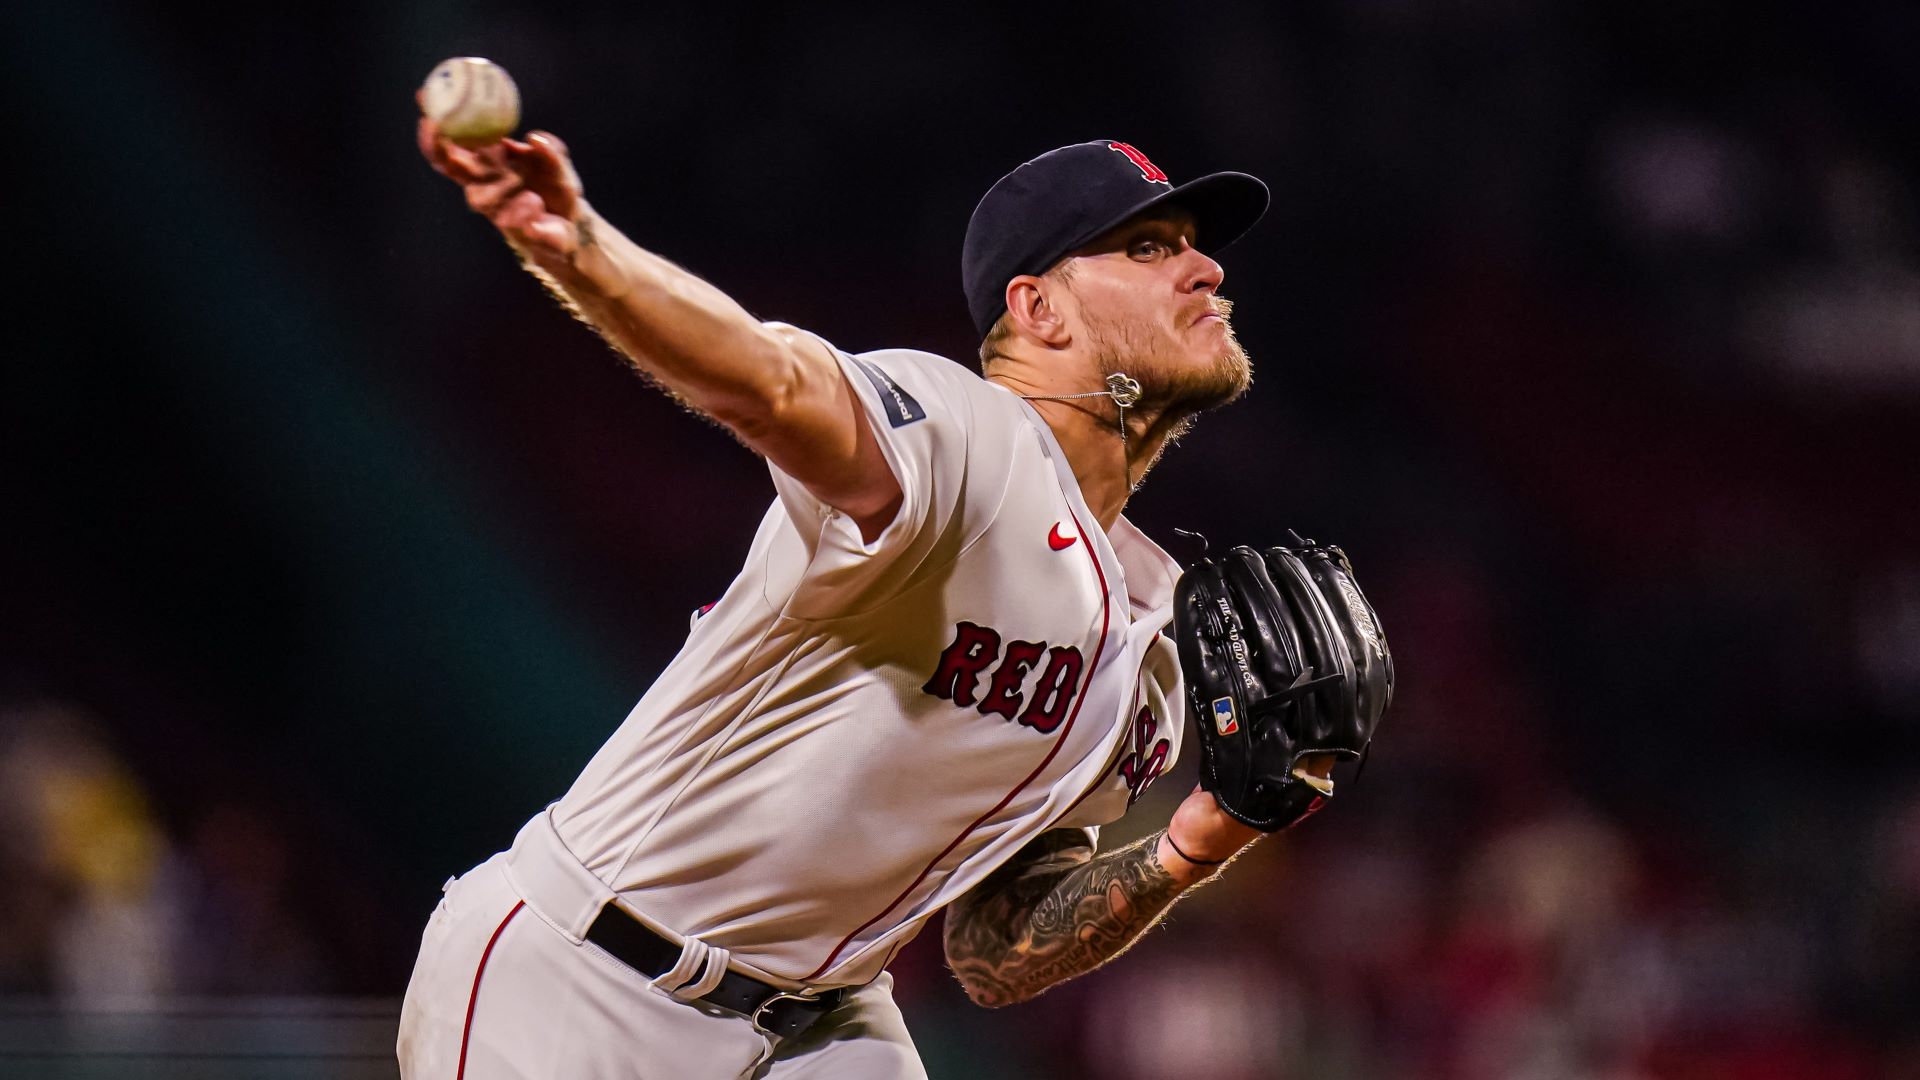 Red Sox Notes: Boston Falls Behind With Short Starting Pitching